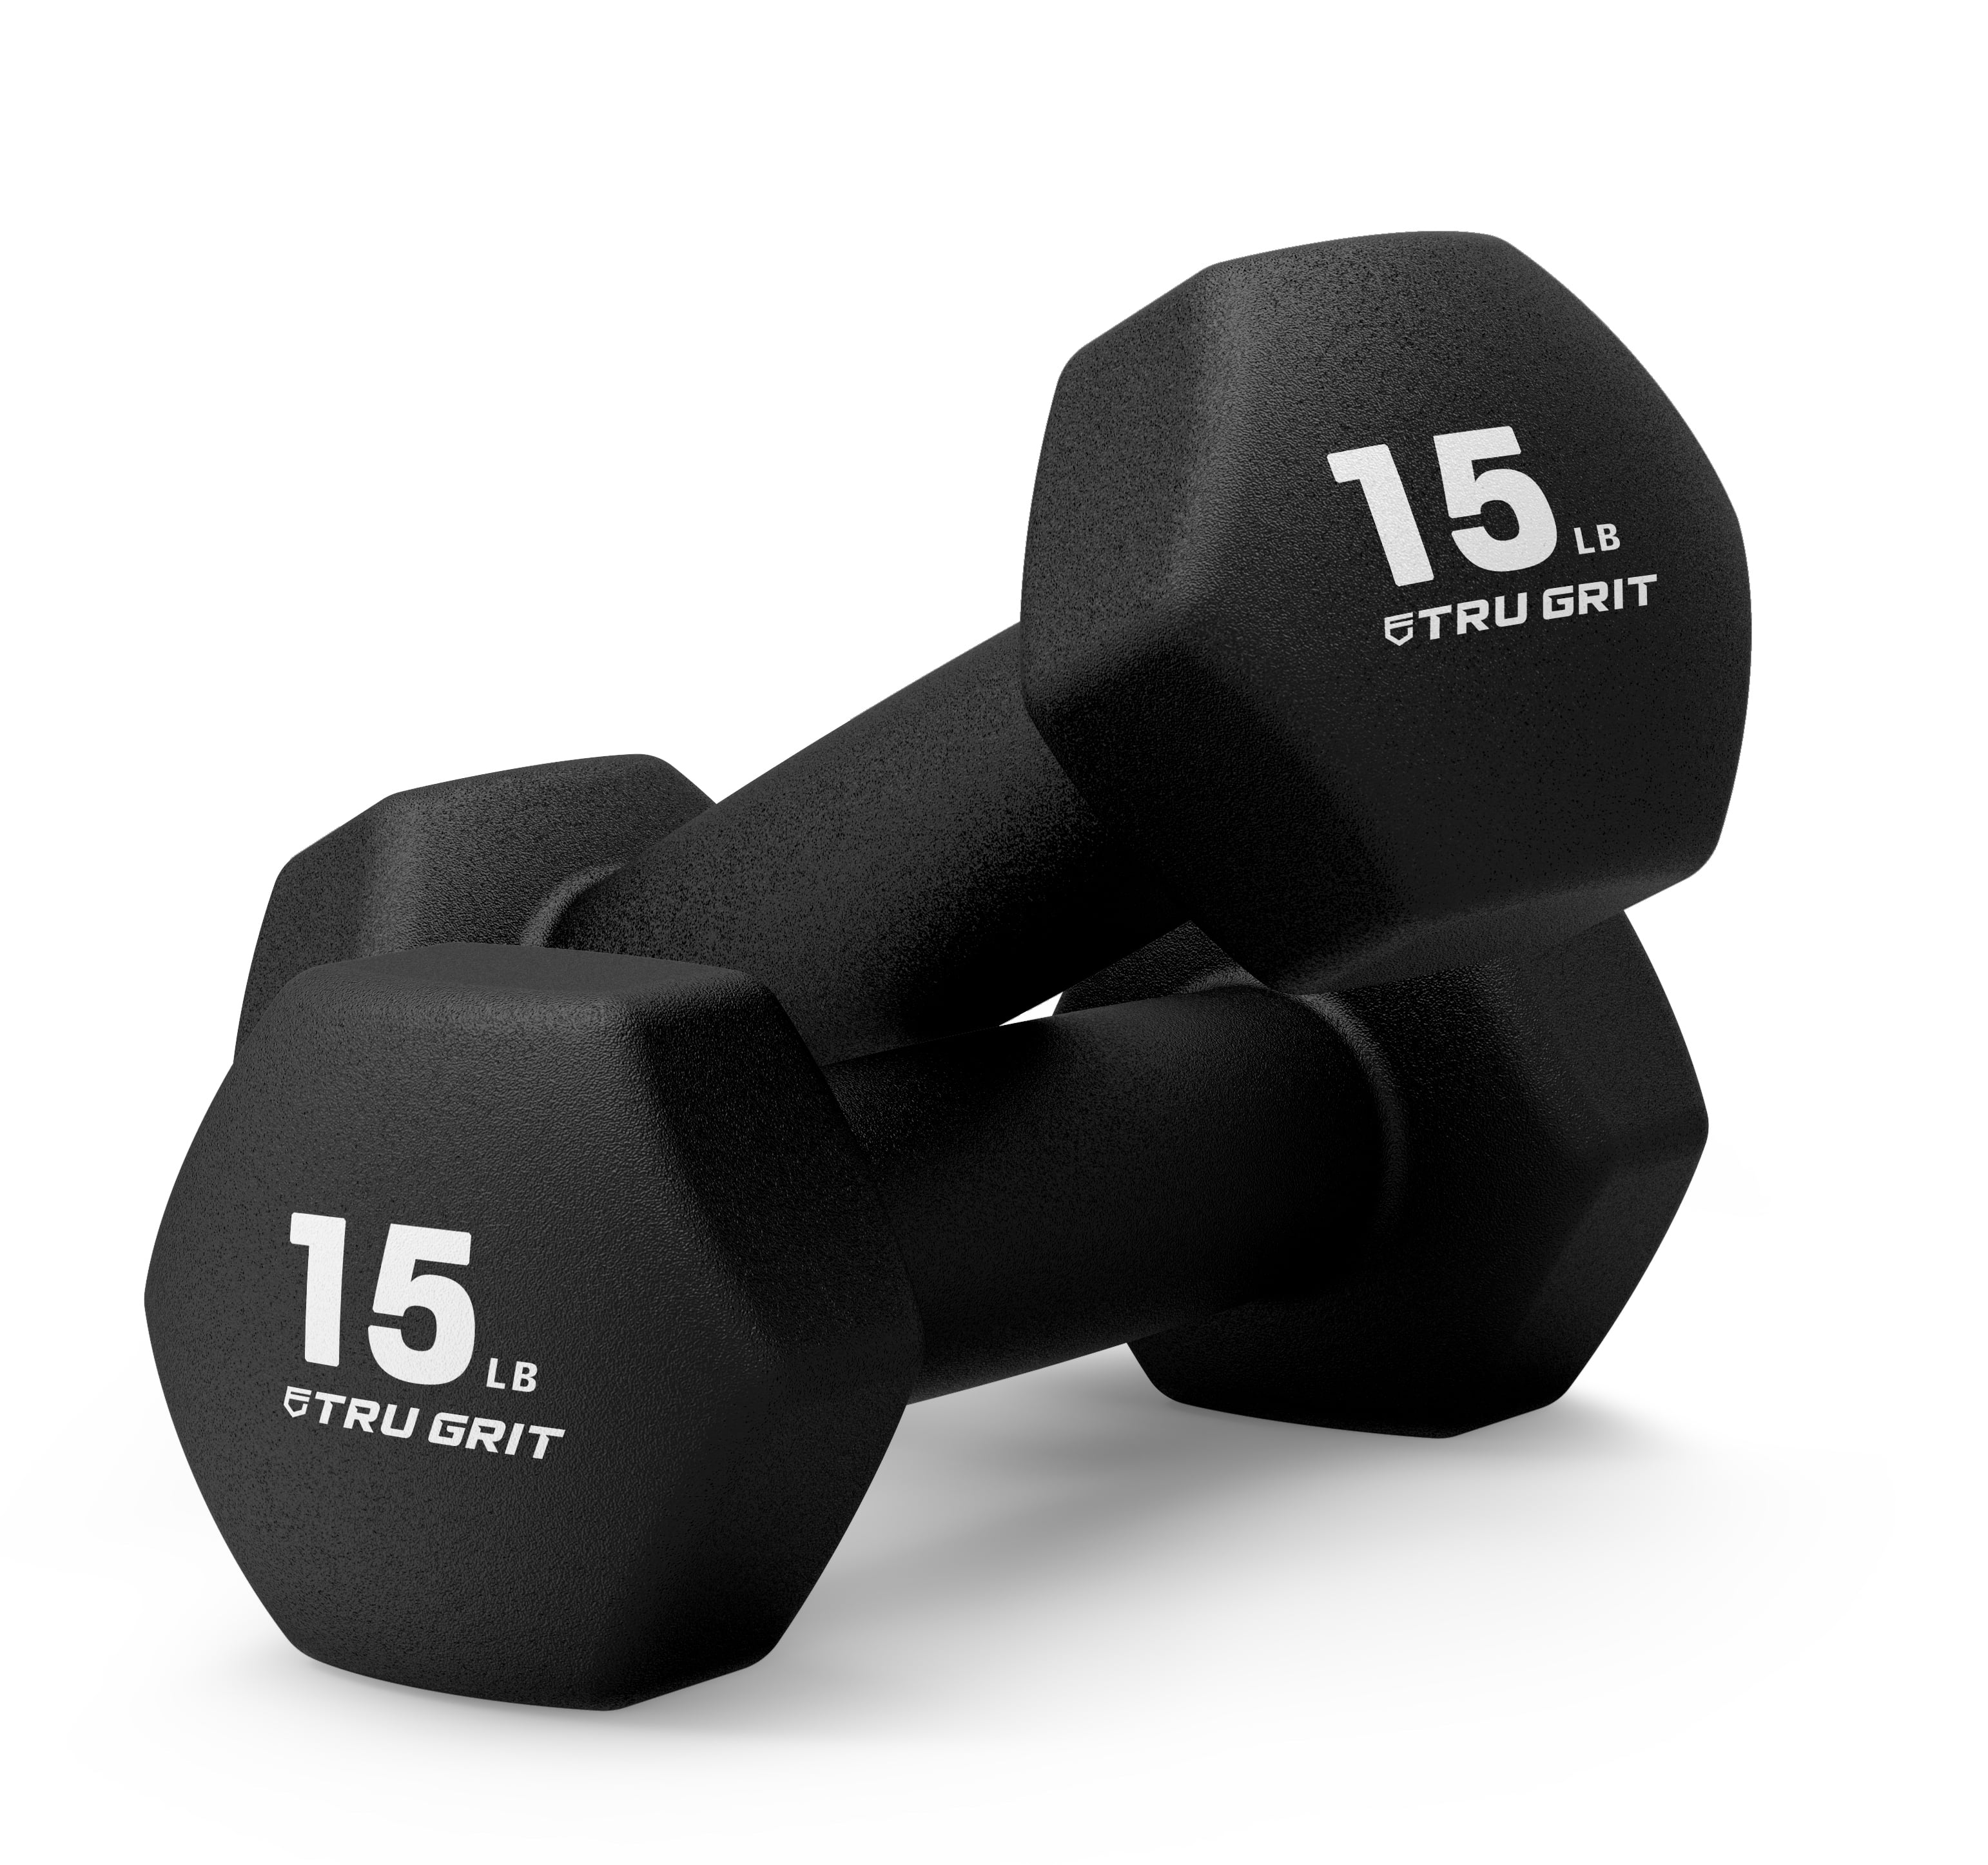 SET OF 2 NEOPRENE DUMBBELL Hand Weights Fitness Home Workout Exercise 1-15 lbs 